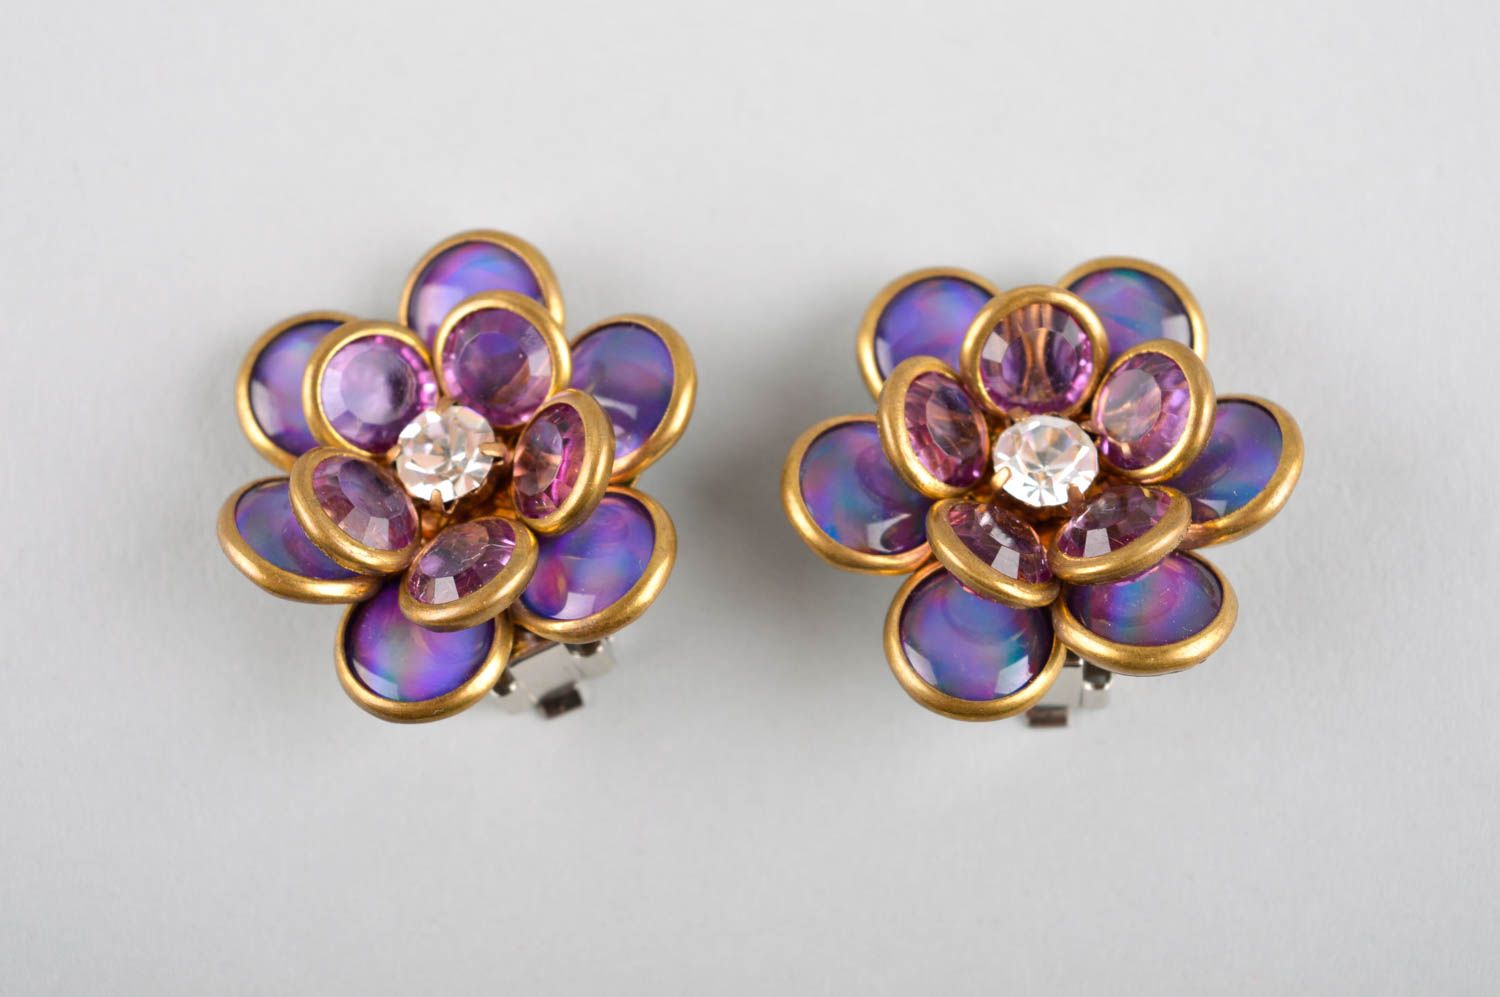 Handmade clip earrings flower earrings fashion accessories gifts for her photo 3